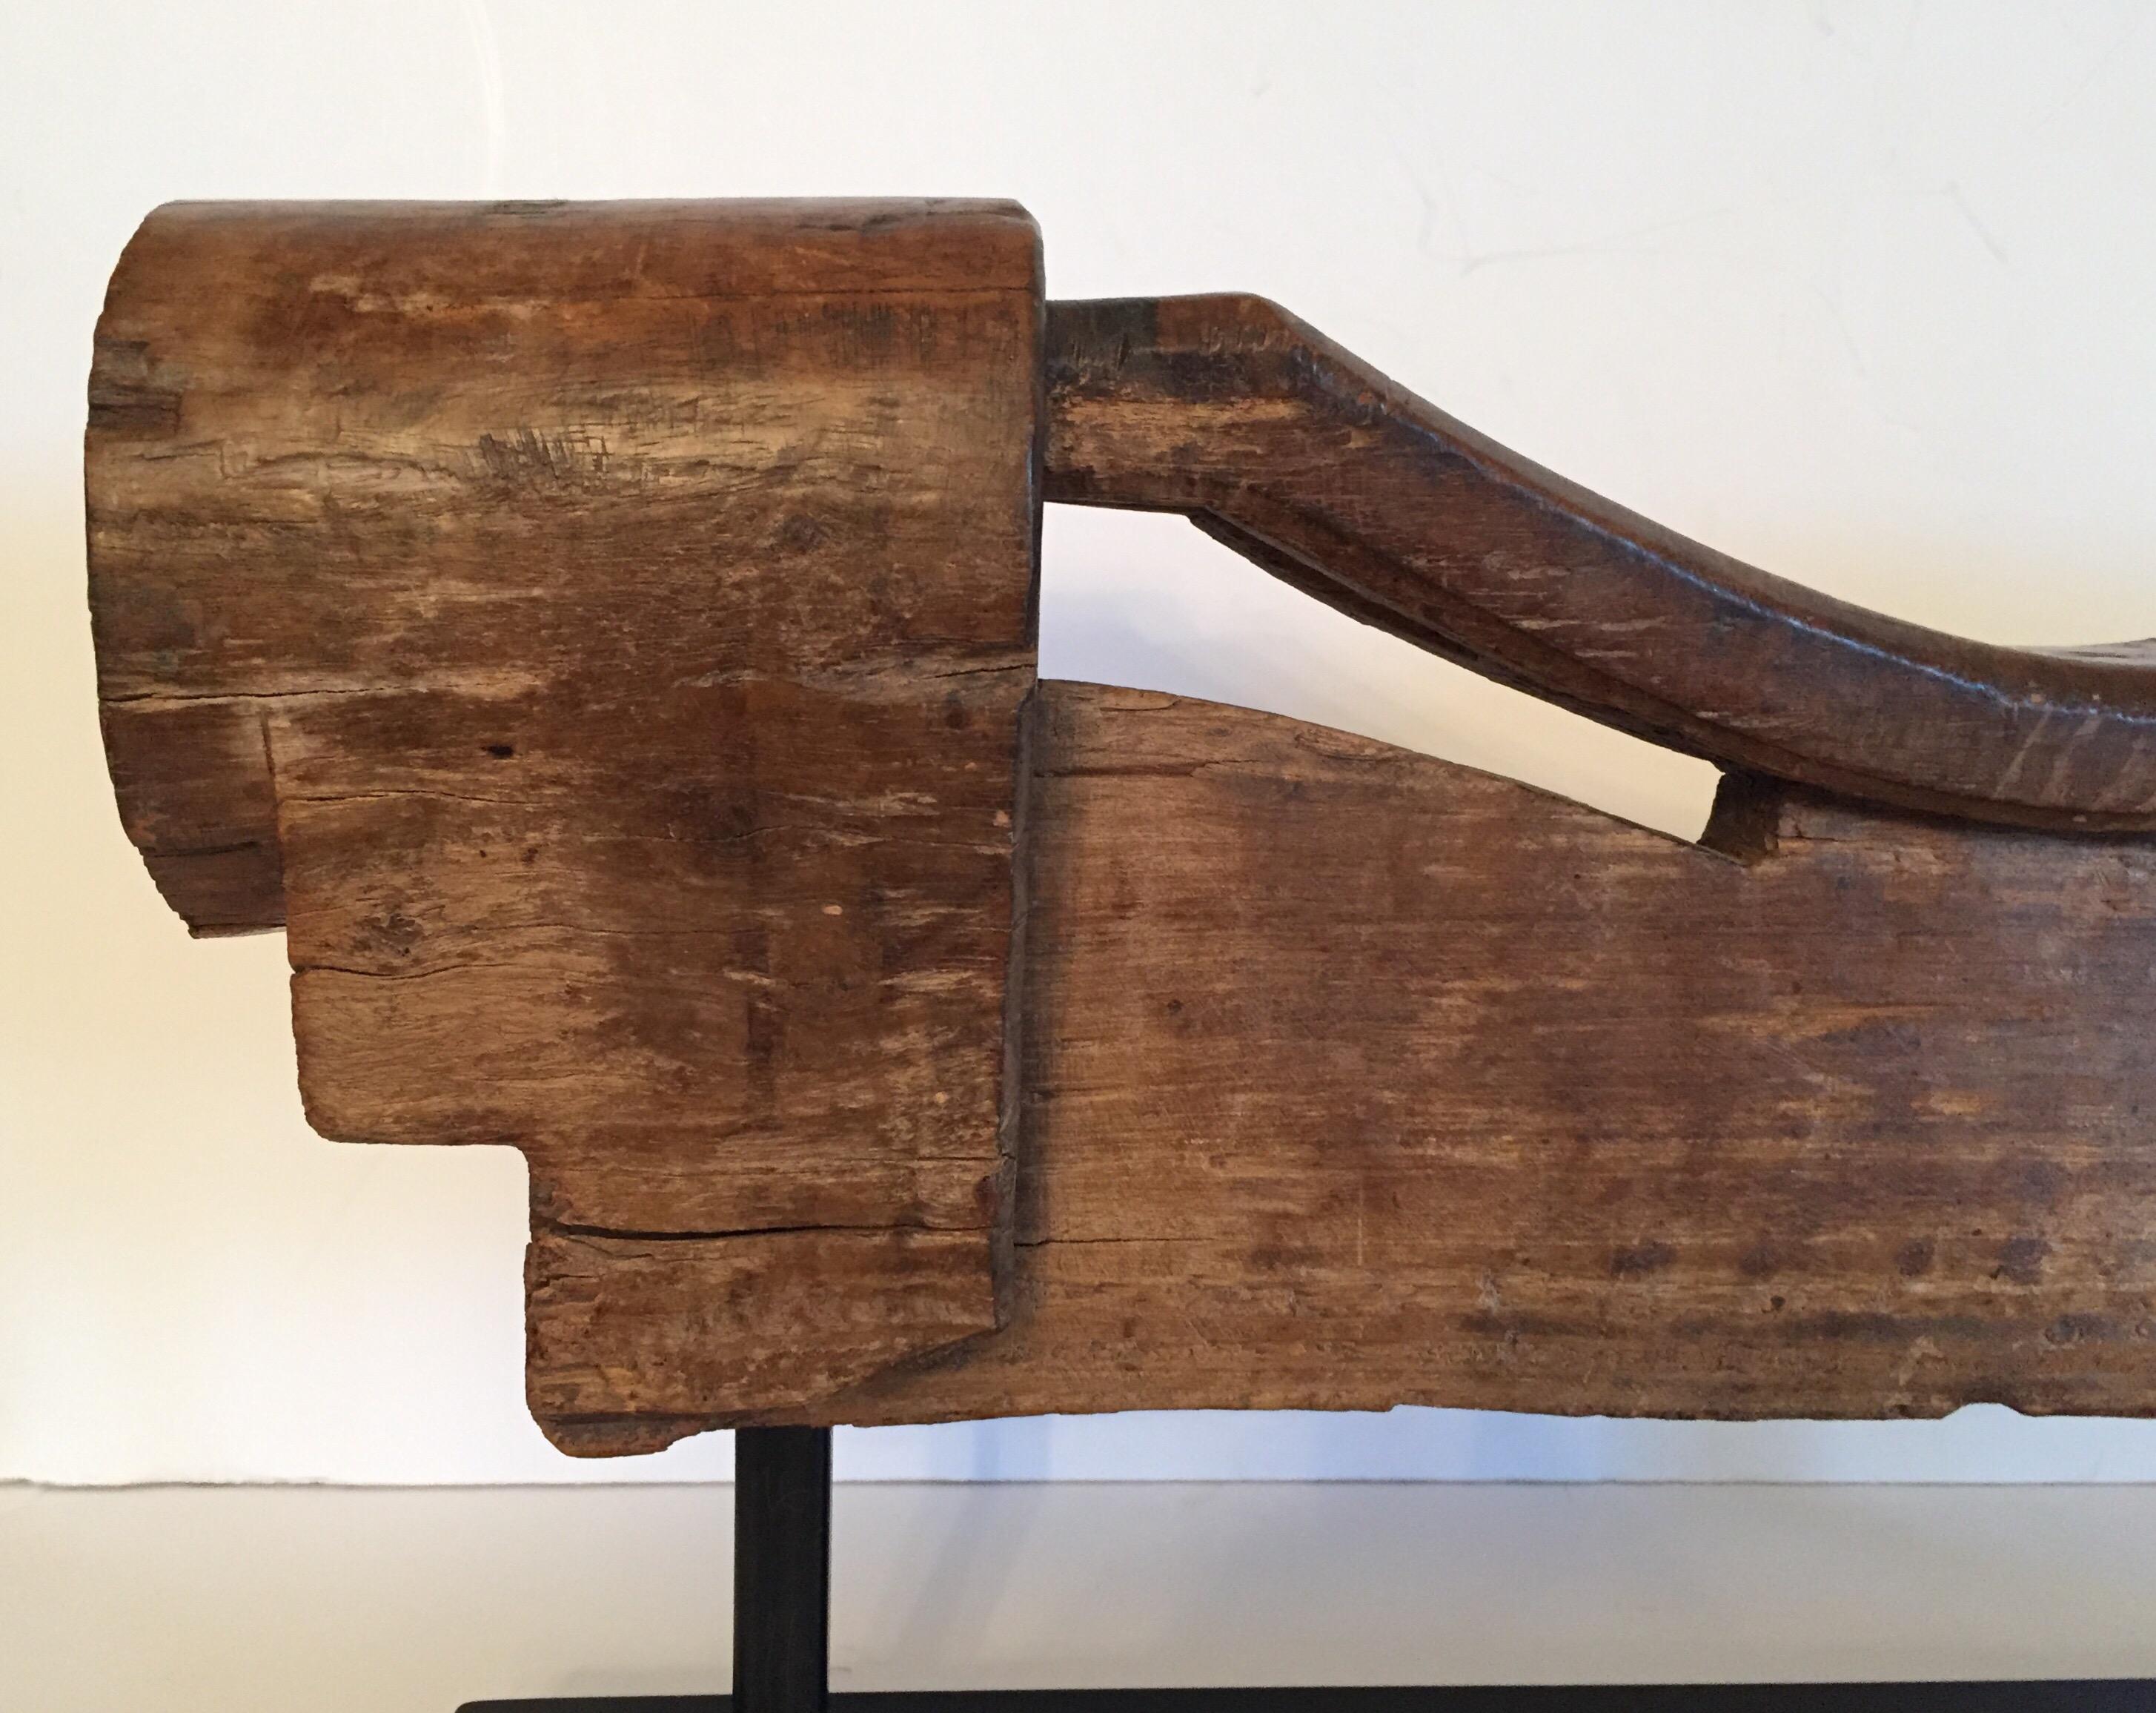 A rustic ox wooden yoke mounted on a custom made black wooden painted stepped base stand. 
In rustic appearance and large proportions this rustic tribal wooden yoke will be a wonderful conversation piece, and will no doubt add a touch of